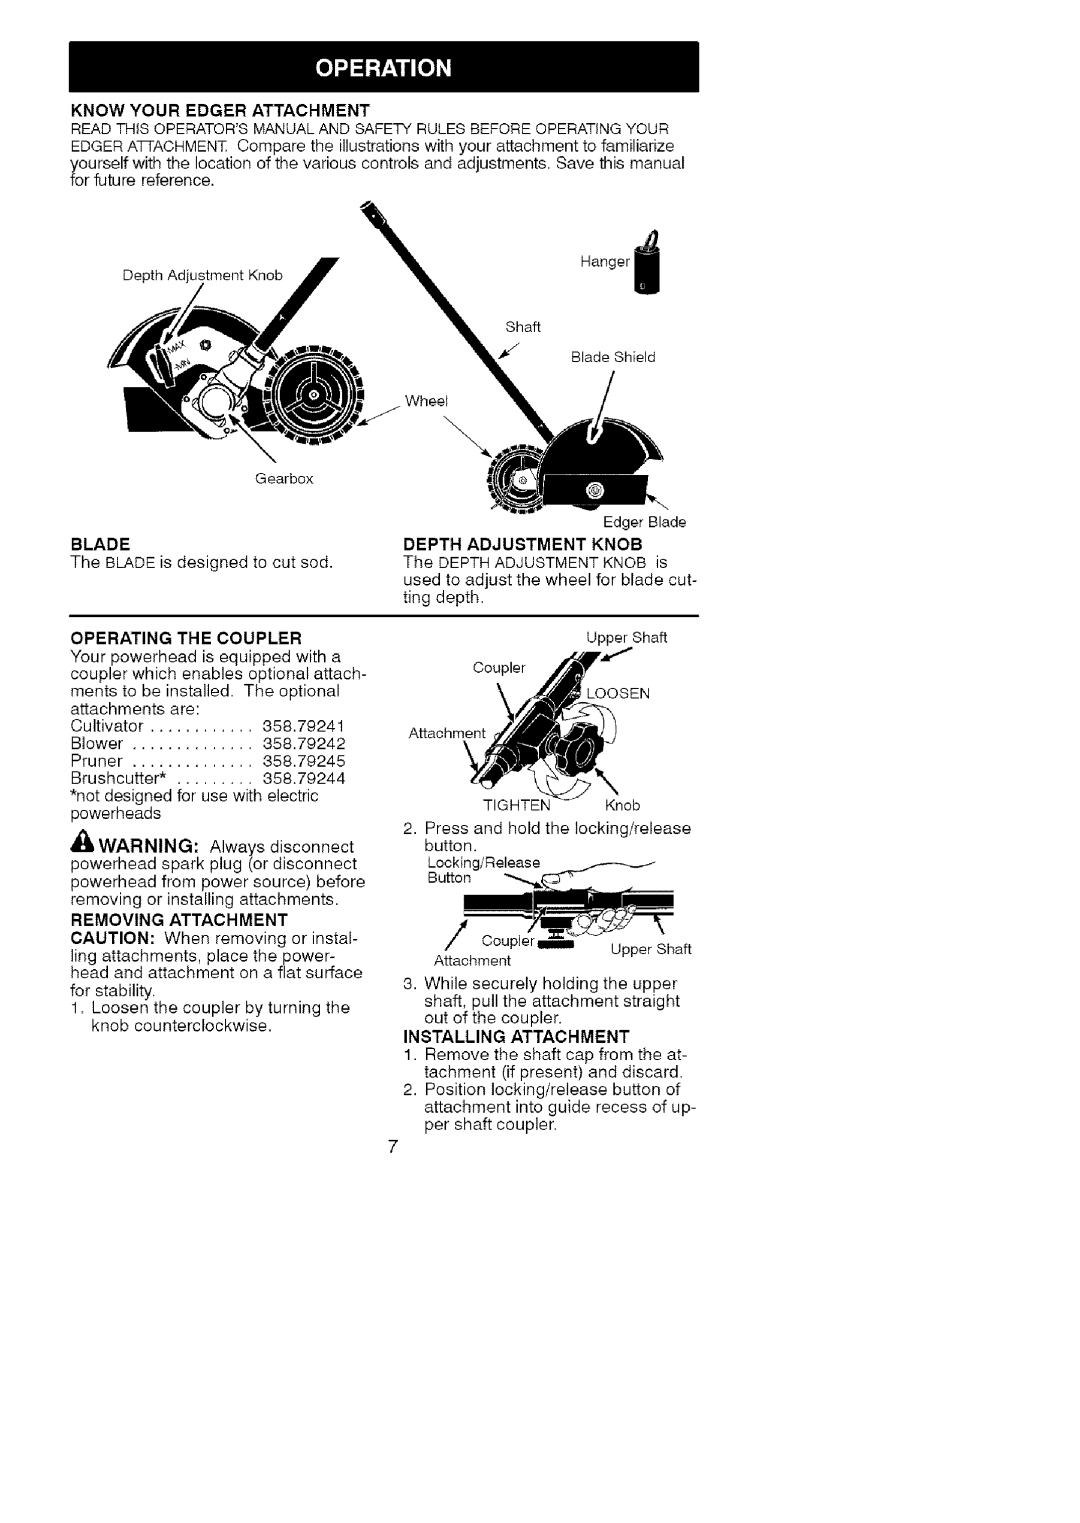 Craftsman 358.792403 manual Knowyouredger Attachment, Blade, Operating The Coupler, Installing Attachment 